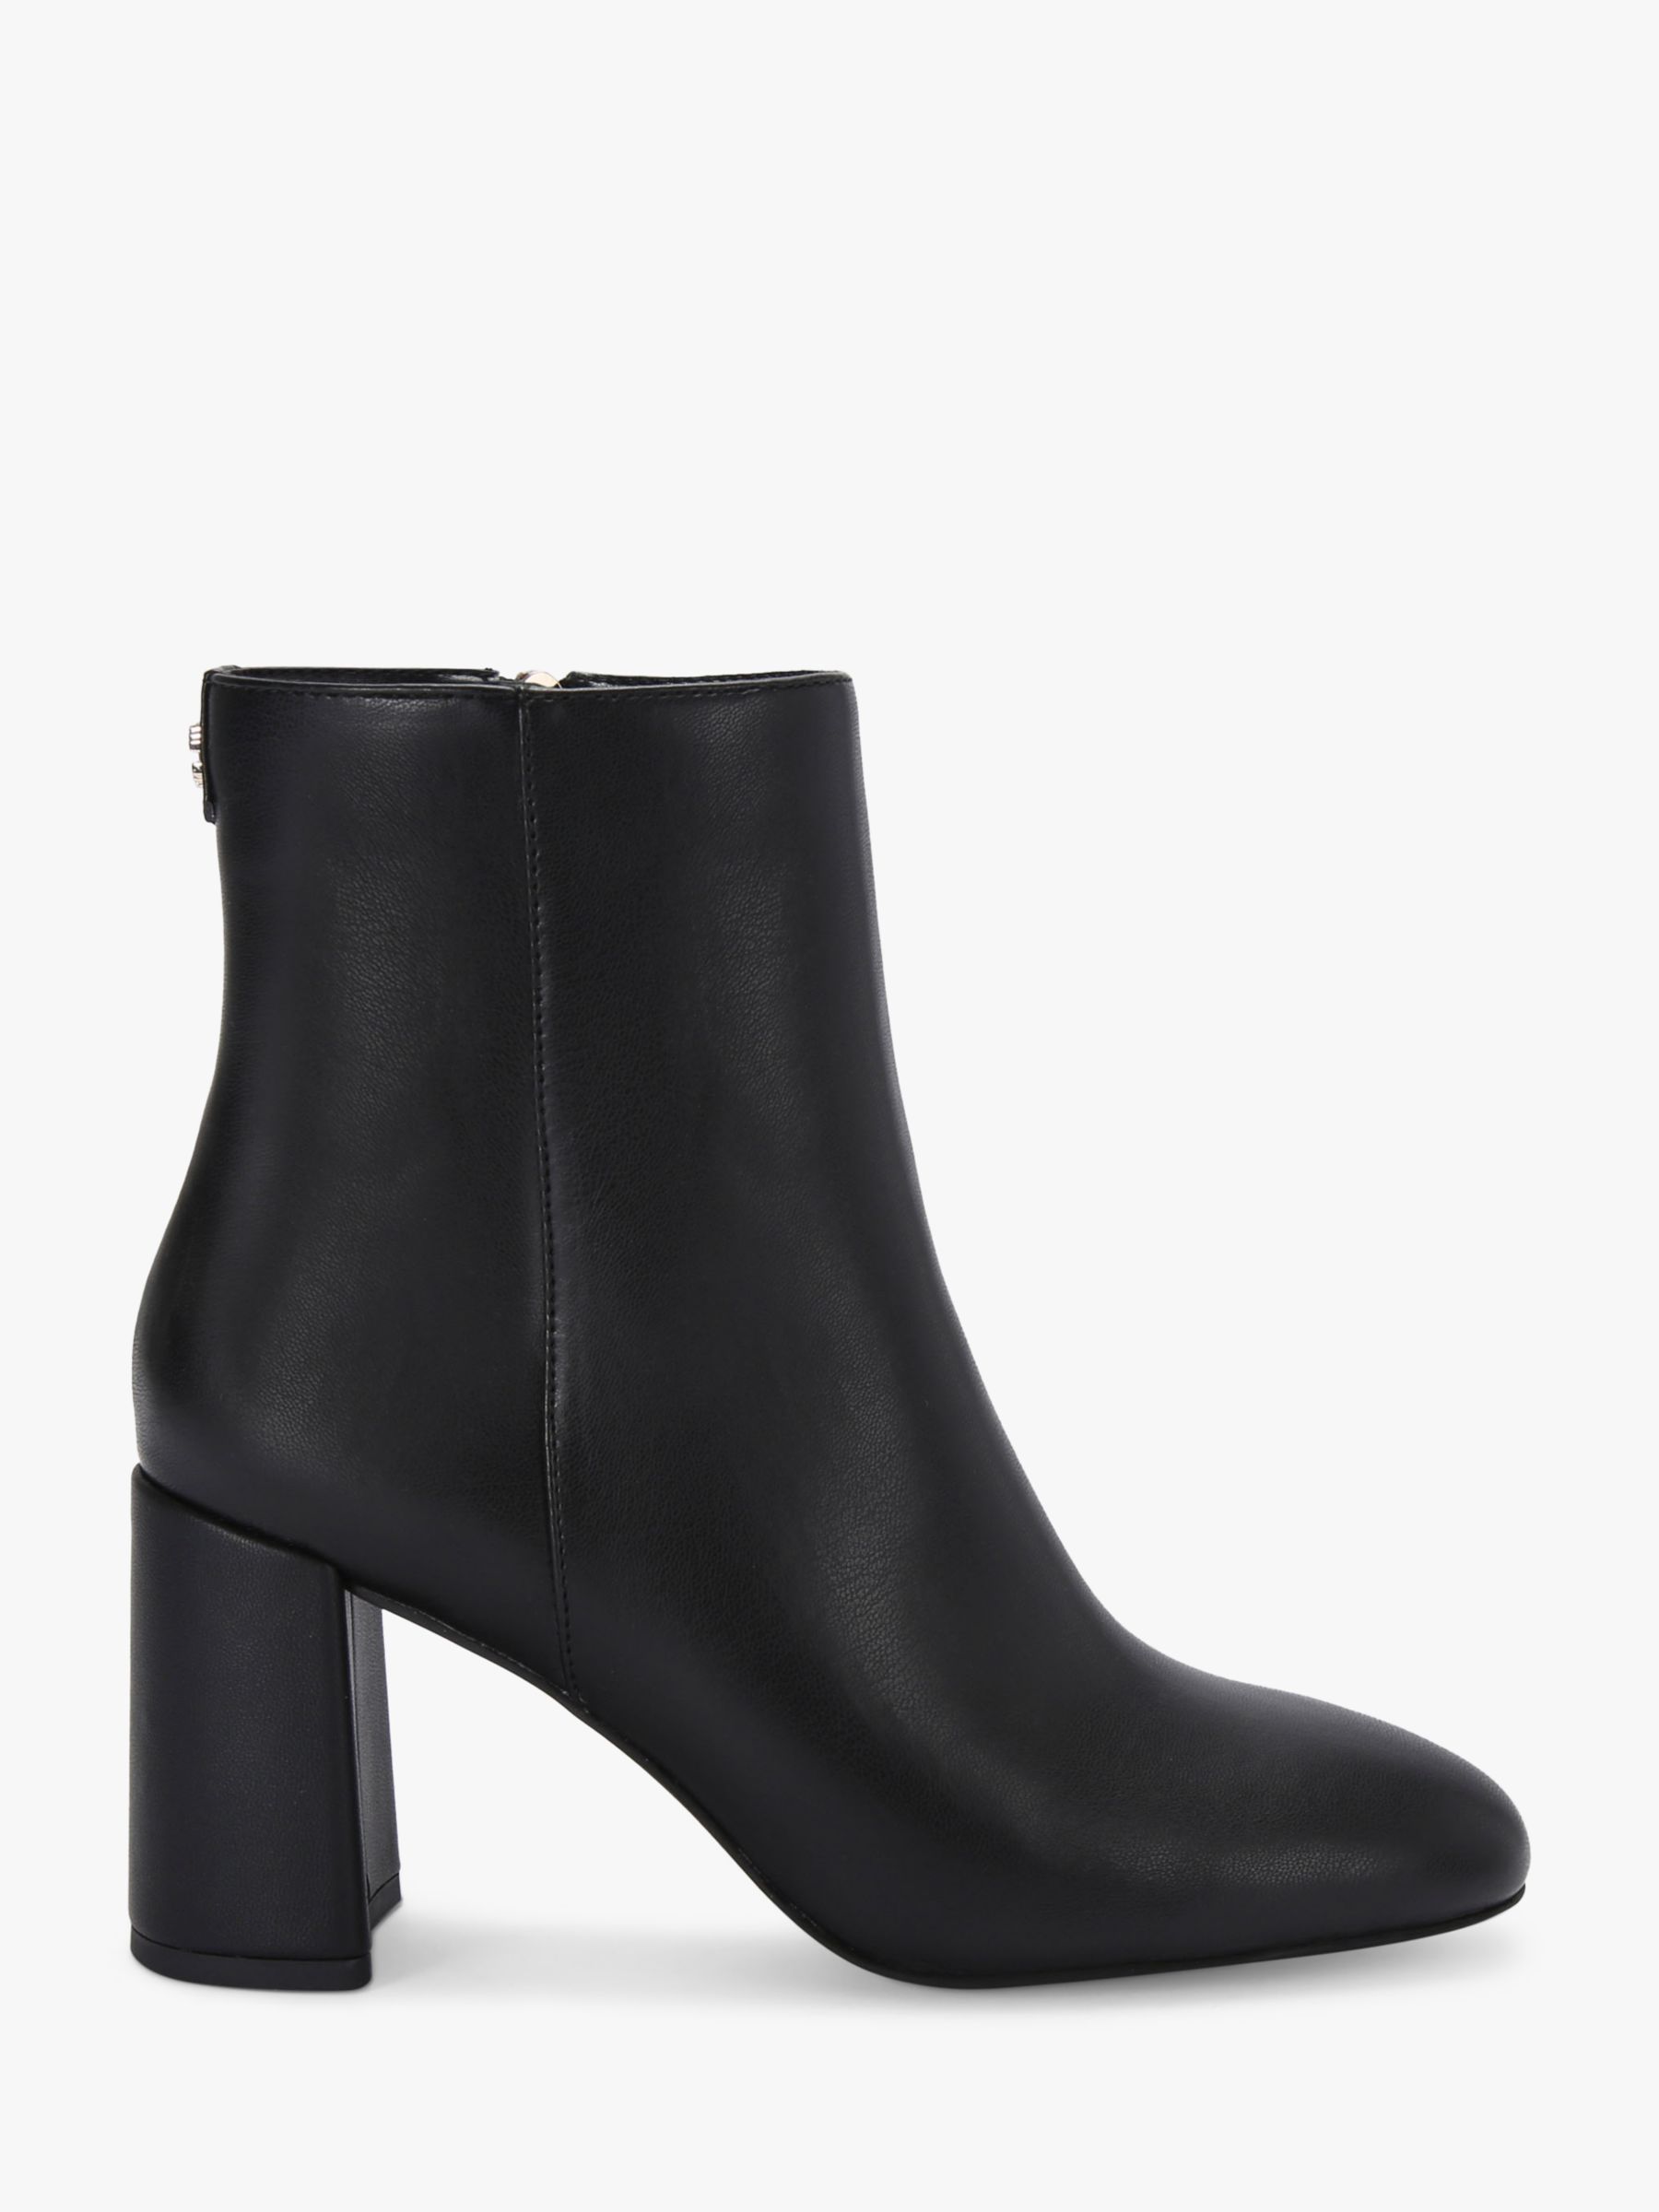 Carvela Willow Ankle Boots, Black at John Lewis & Partners